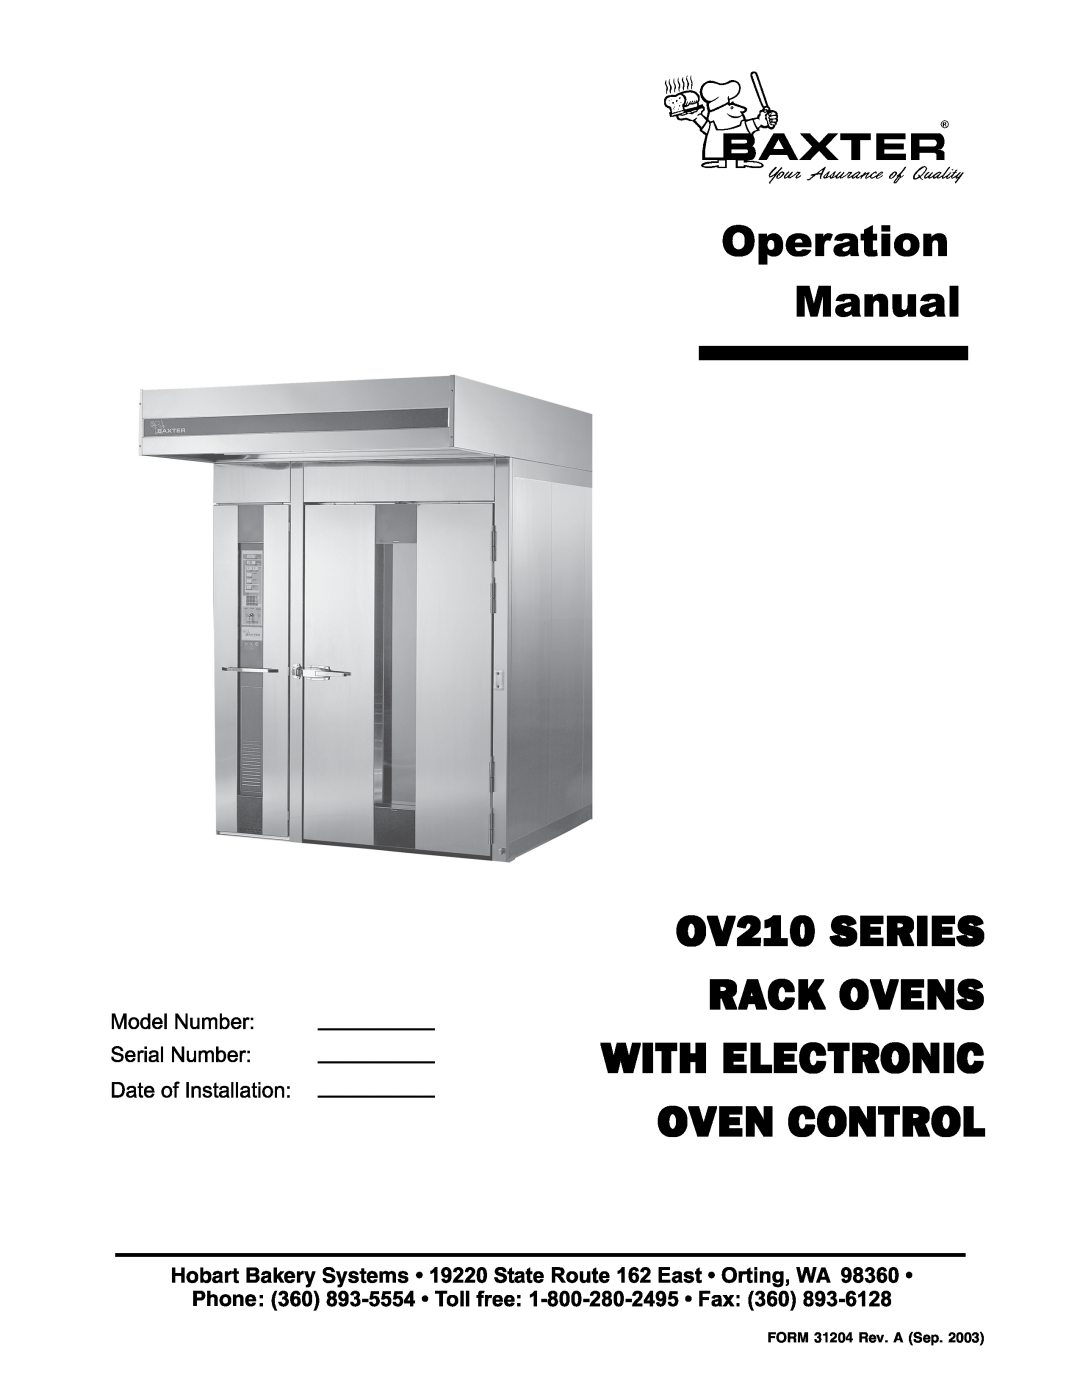 Hobart manual OV210 SERIES RACK OVENS WITH ELECTRONIC OVEN CONTROL, Hobart Bakery Systems A Phone 